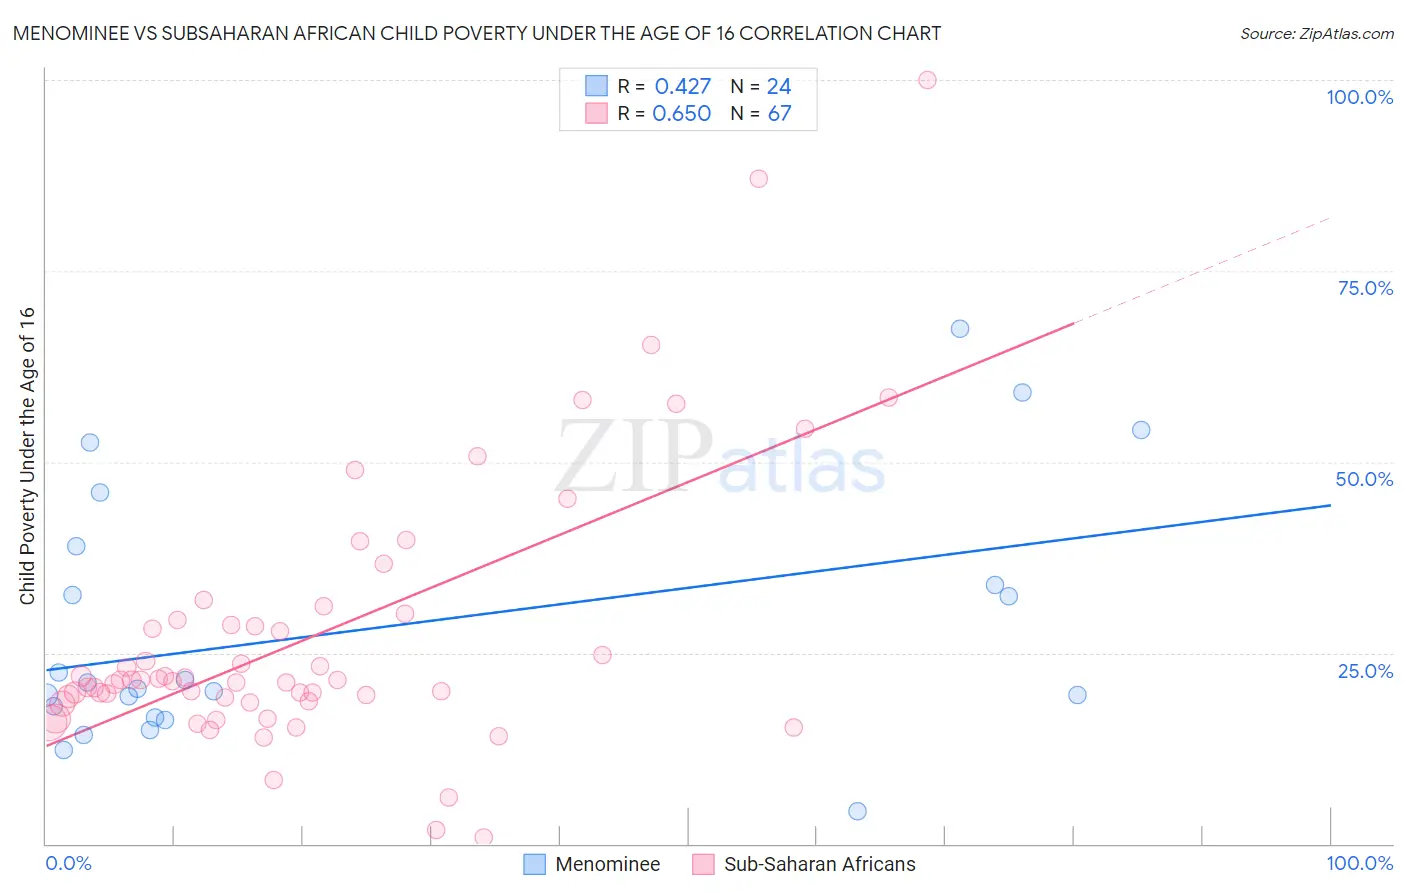 Menominee vs Subsaharan African Child Poverty Under the Age of 16